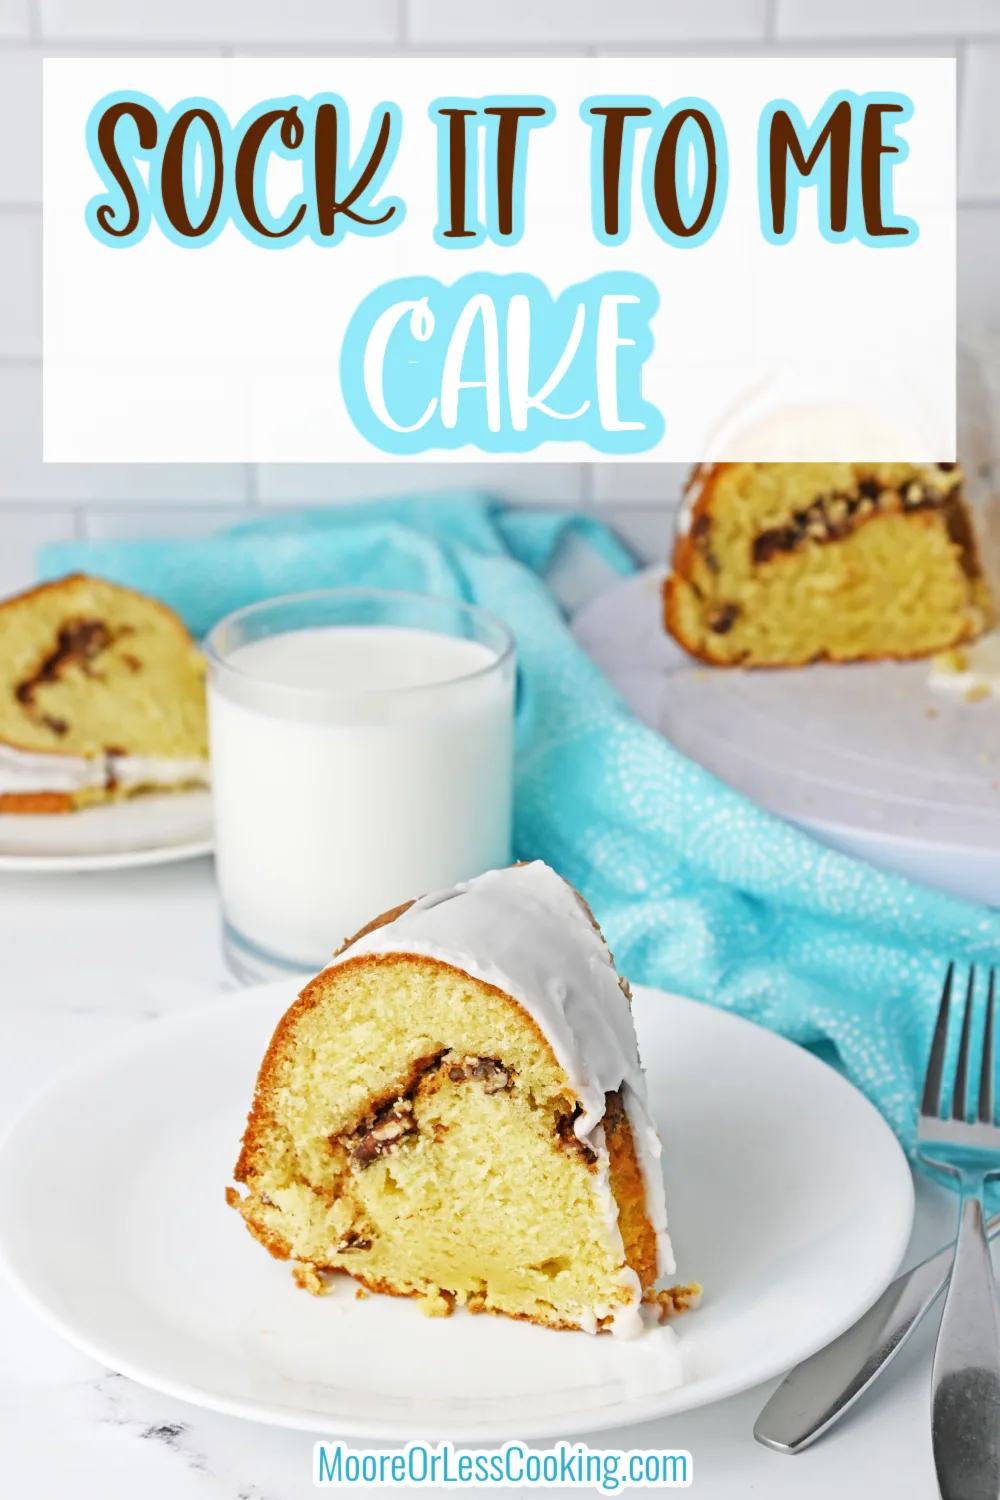 Vintage Bundt cake recipe that's rich, buttery and swirled with a hidden streusel that's full of cinnamon, brown sugar and pecans. Top this Sock It To Me Cake with a sweet glaze before enjoying a slice of this scrumptious dessert. via @Mooreorlesscook